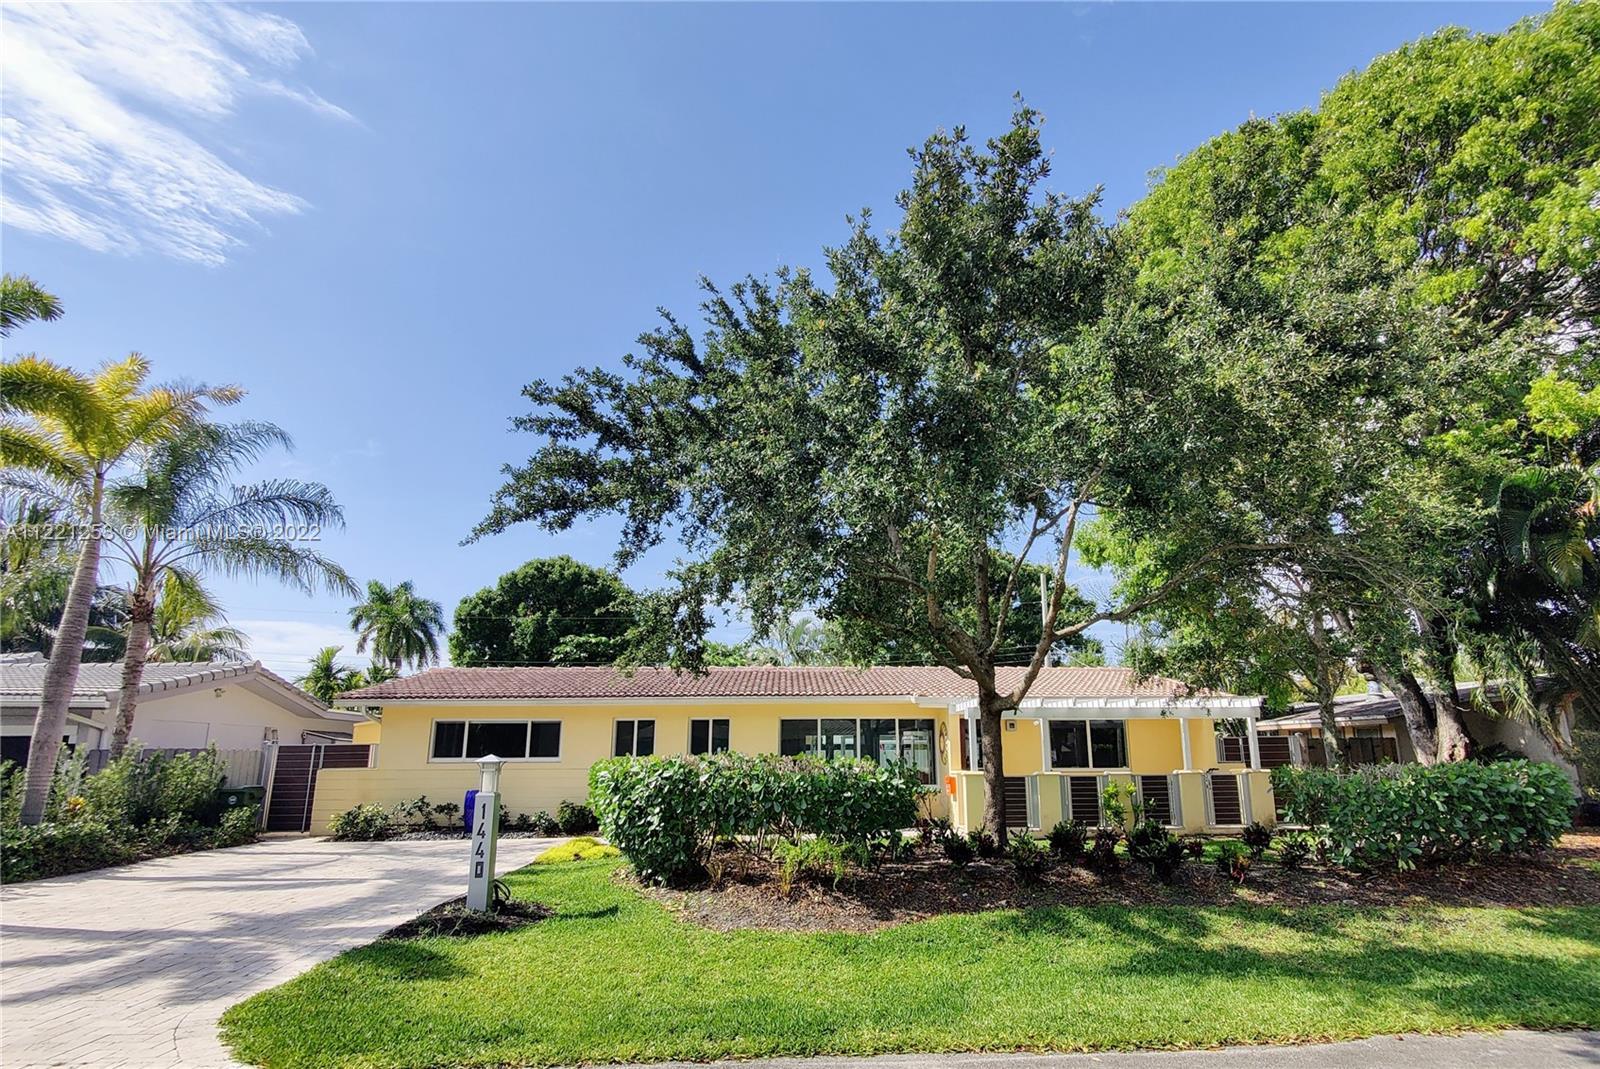 Live a spectacular Wilton Manors lifestyle! This remodeled and spacious home could be your dream com